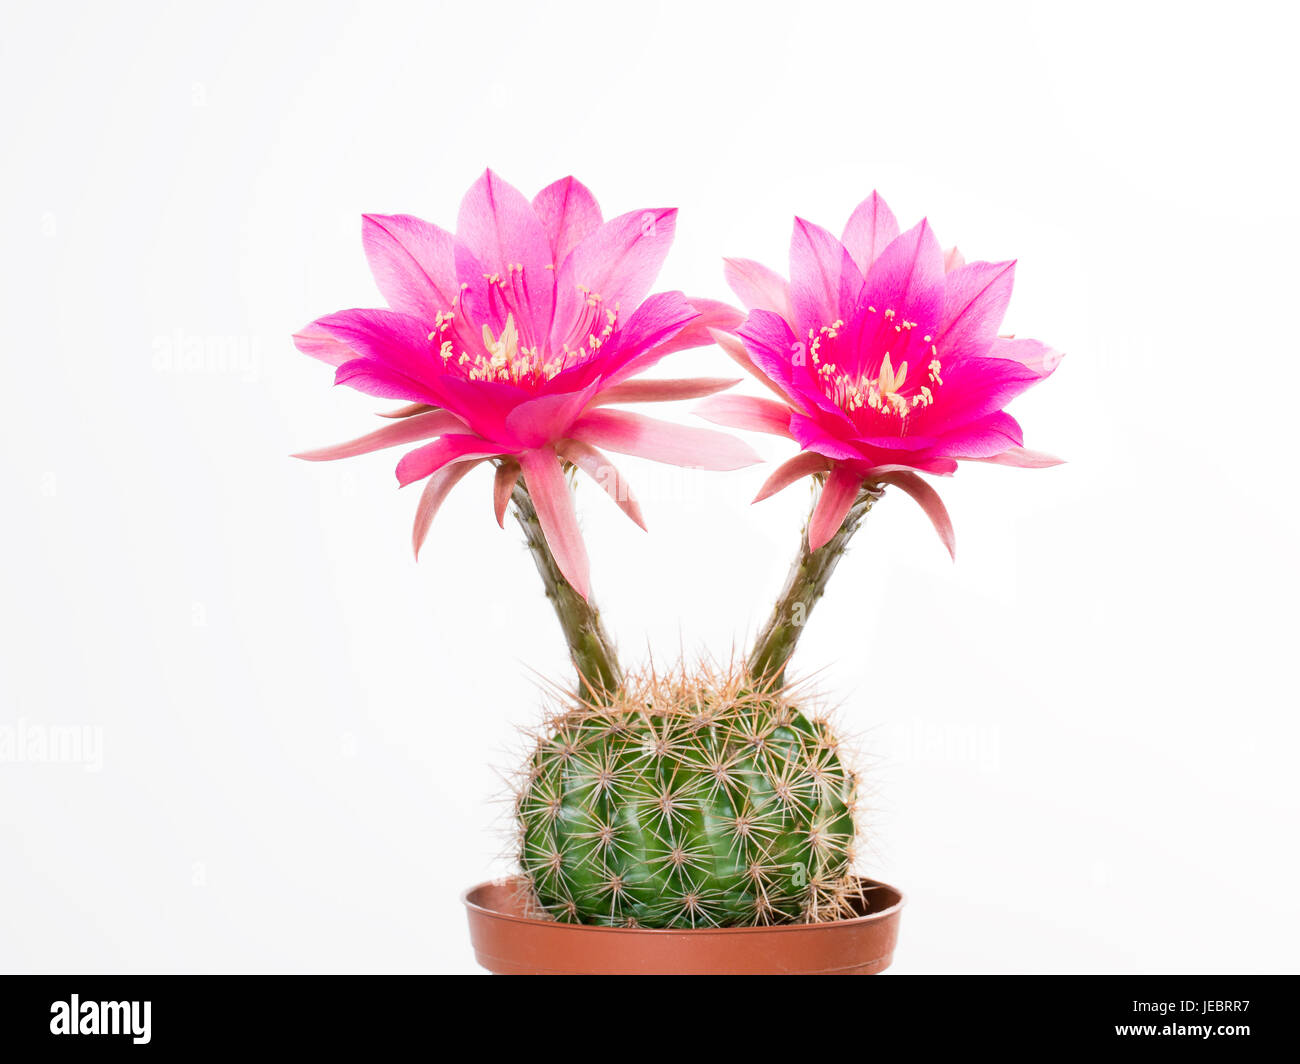 Cactus Echinopsis Kermesina with opening two pink blossoms against white background, isolated Stock Photo